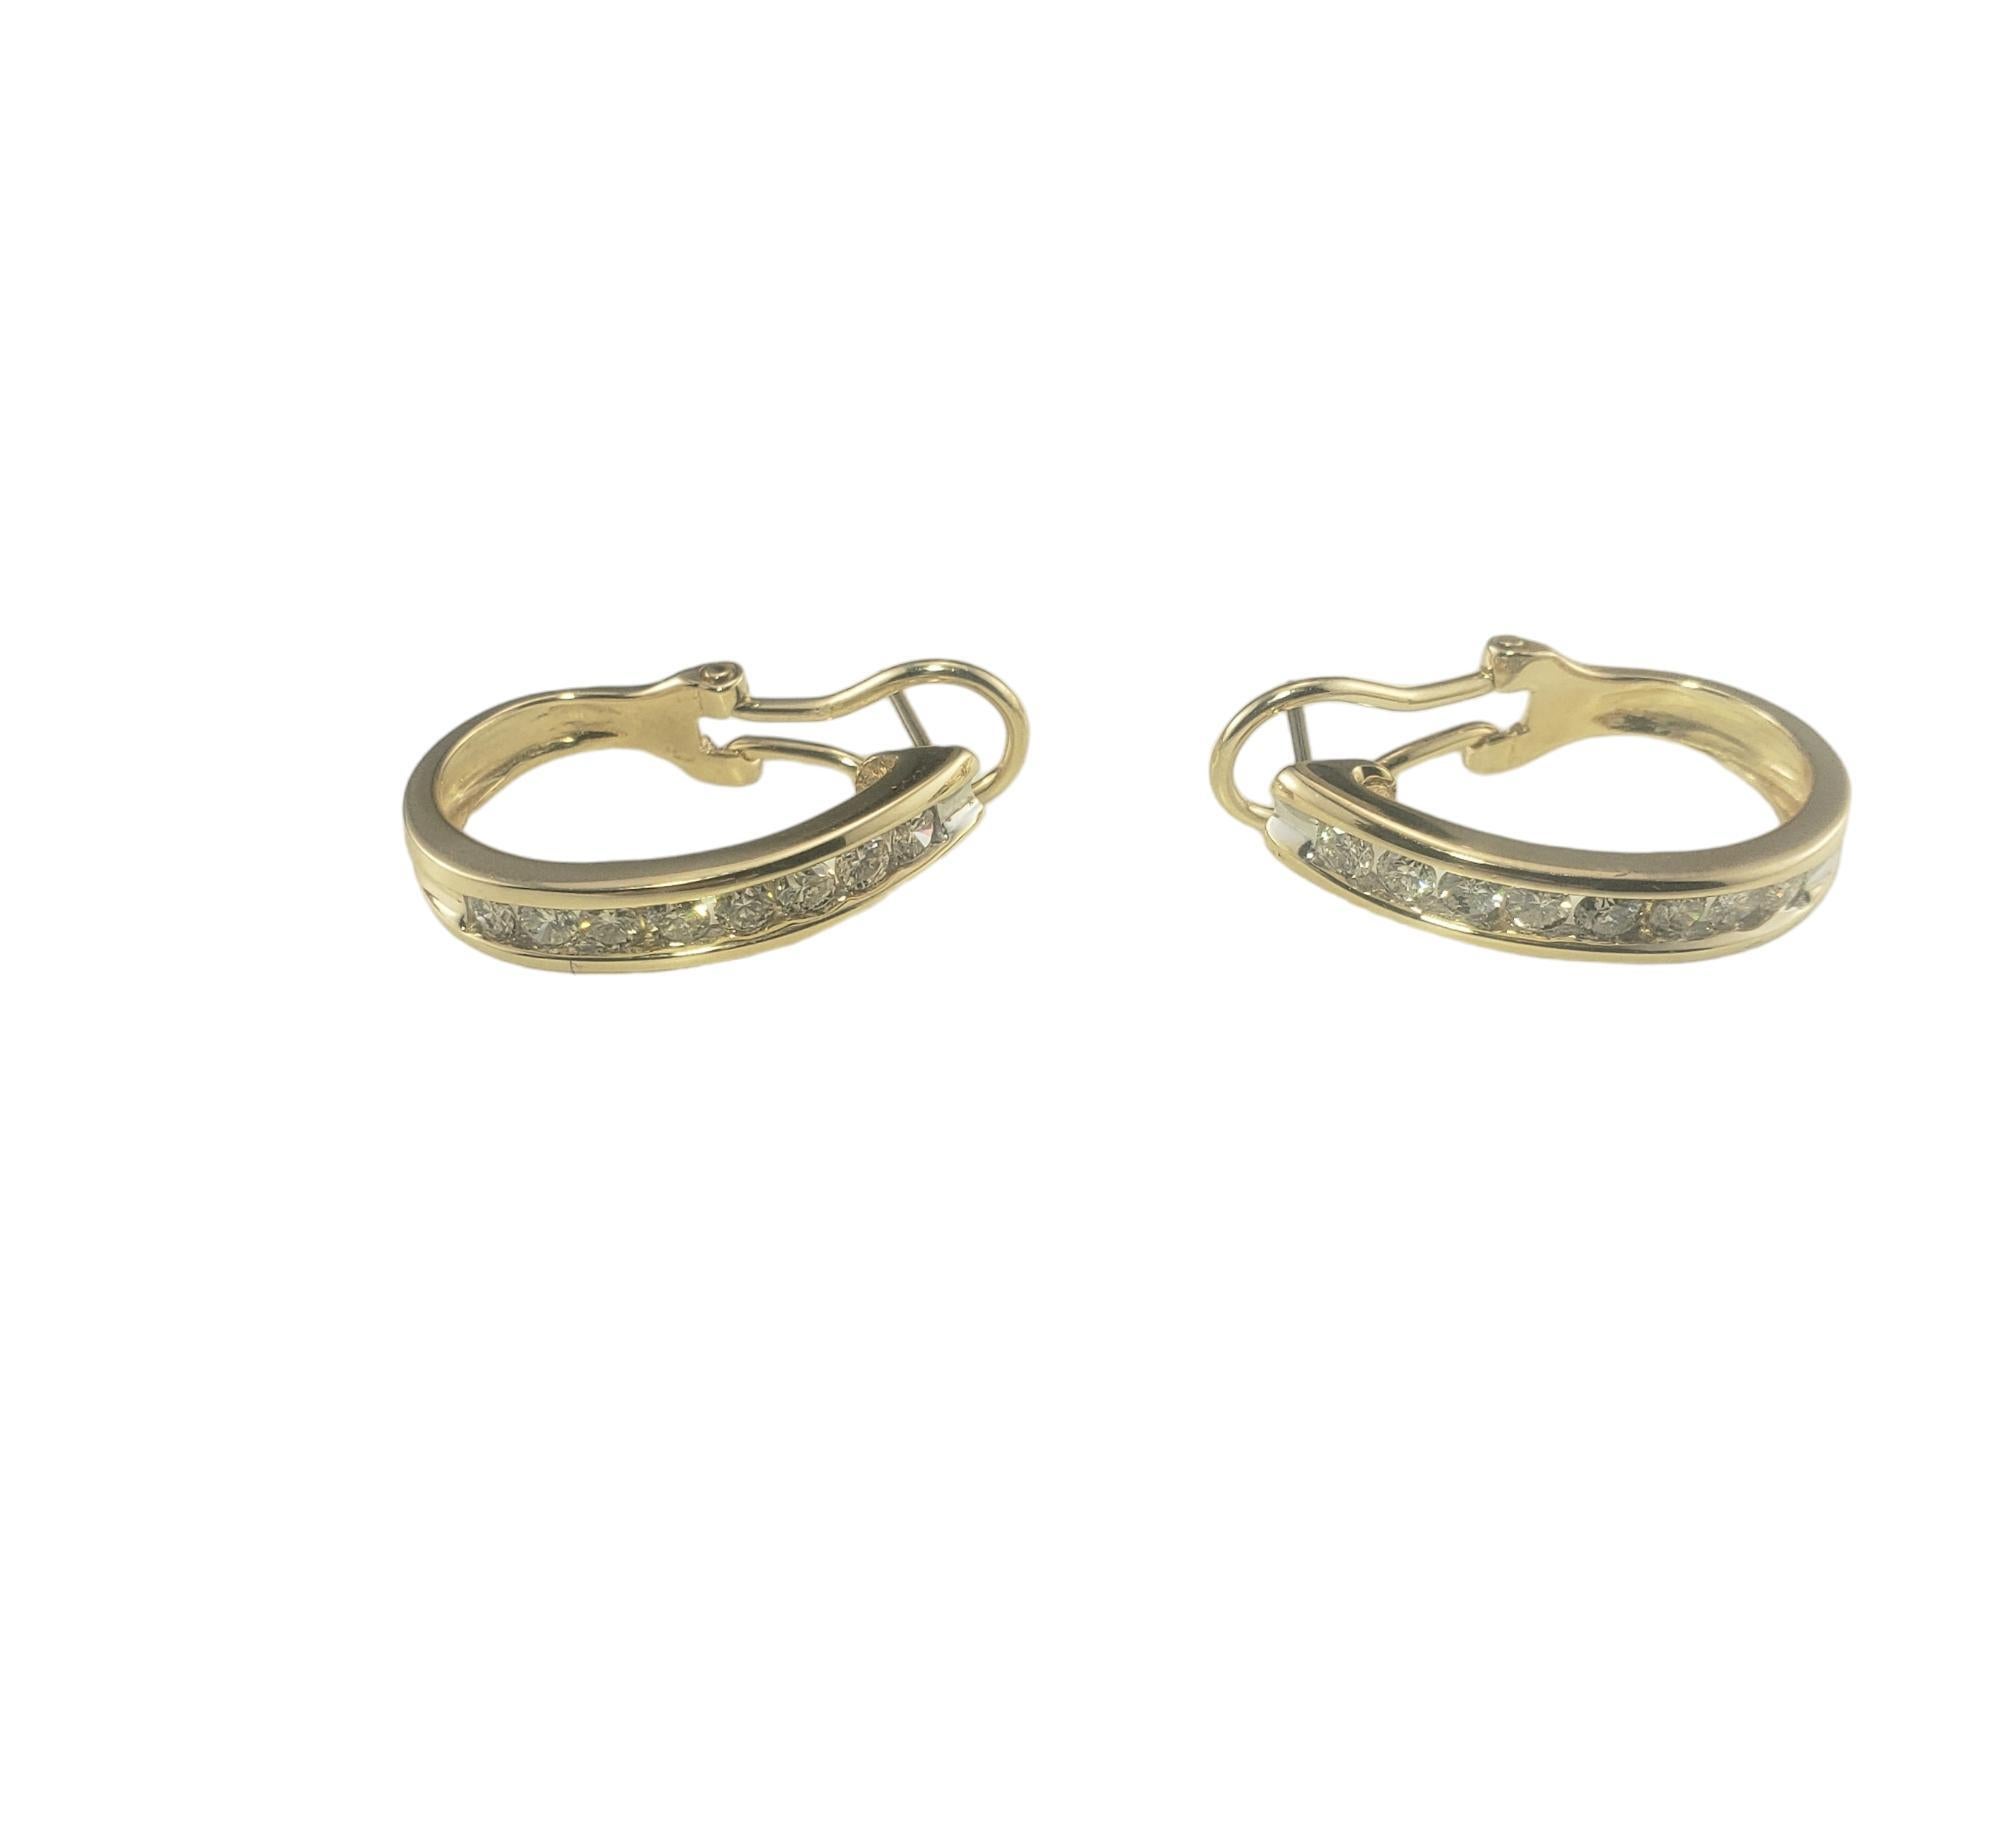 14 Karat Yellow Gold and Diamond Oval Half Hoop Earrings #16751

These elegant earrings each feature eight round brilliant cut diamonds set in classic 14K yellow gold.  Omega back closures. 

Approximate total diamond weight: 0.70 - 0.80